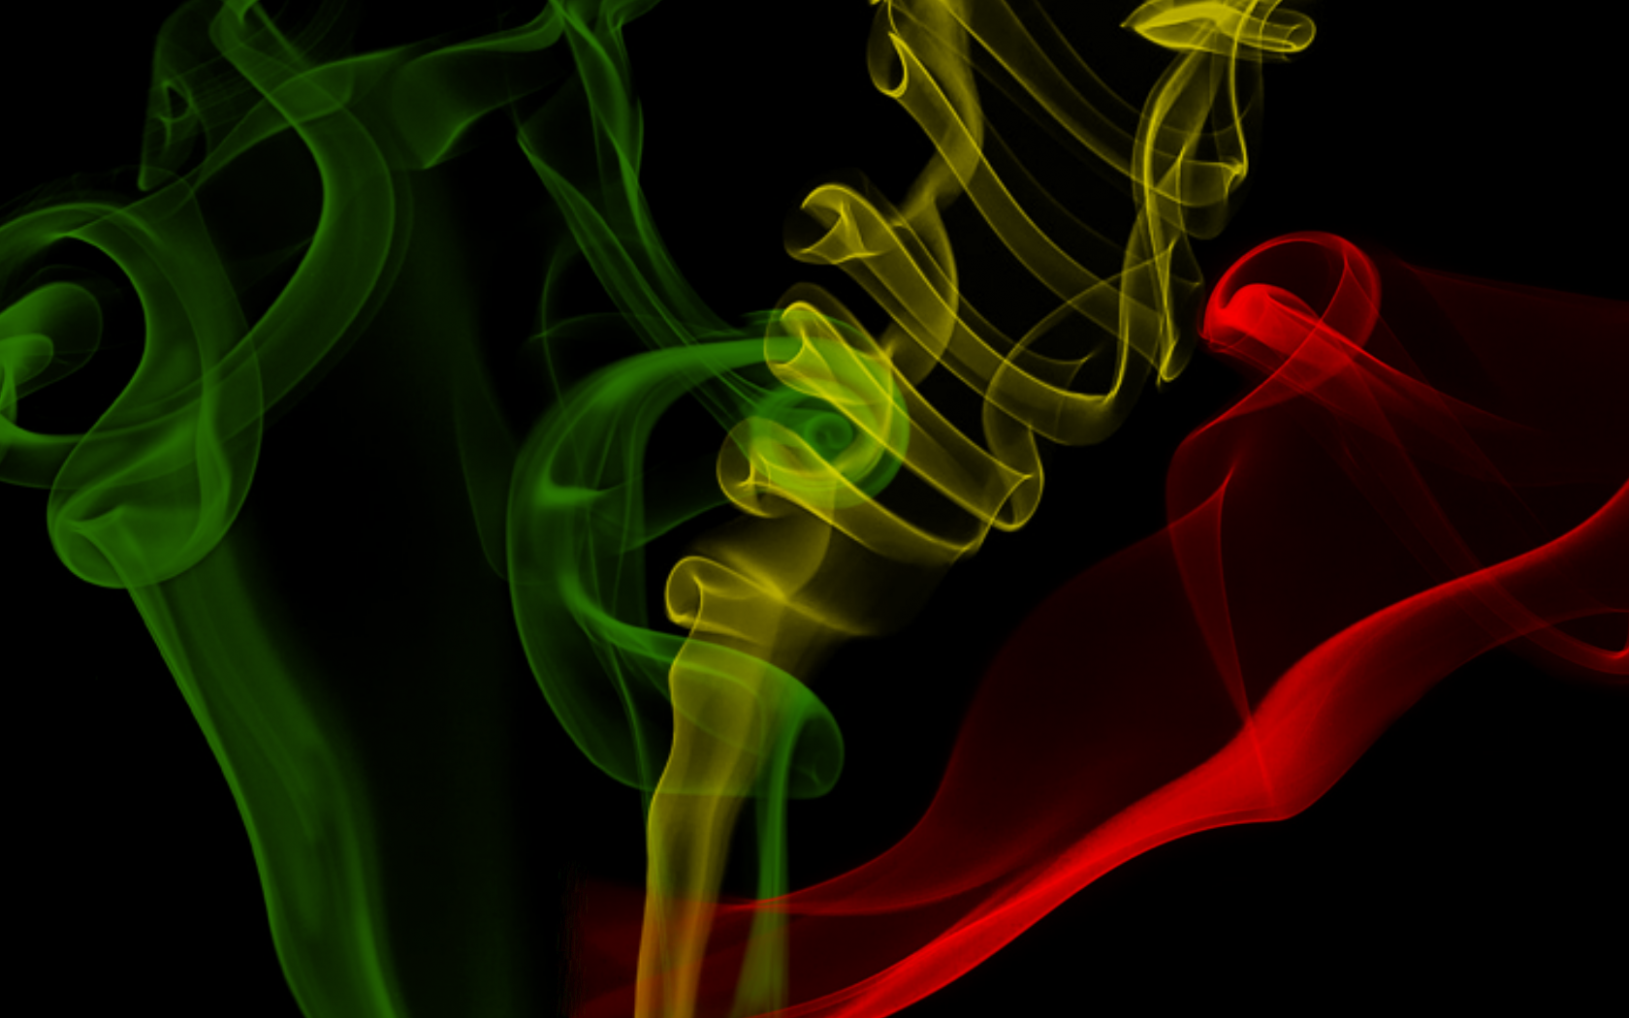 vs23-paint-abstract-background-htc-dark-red-green-pattern-wallpaper